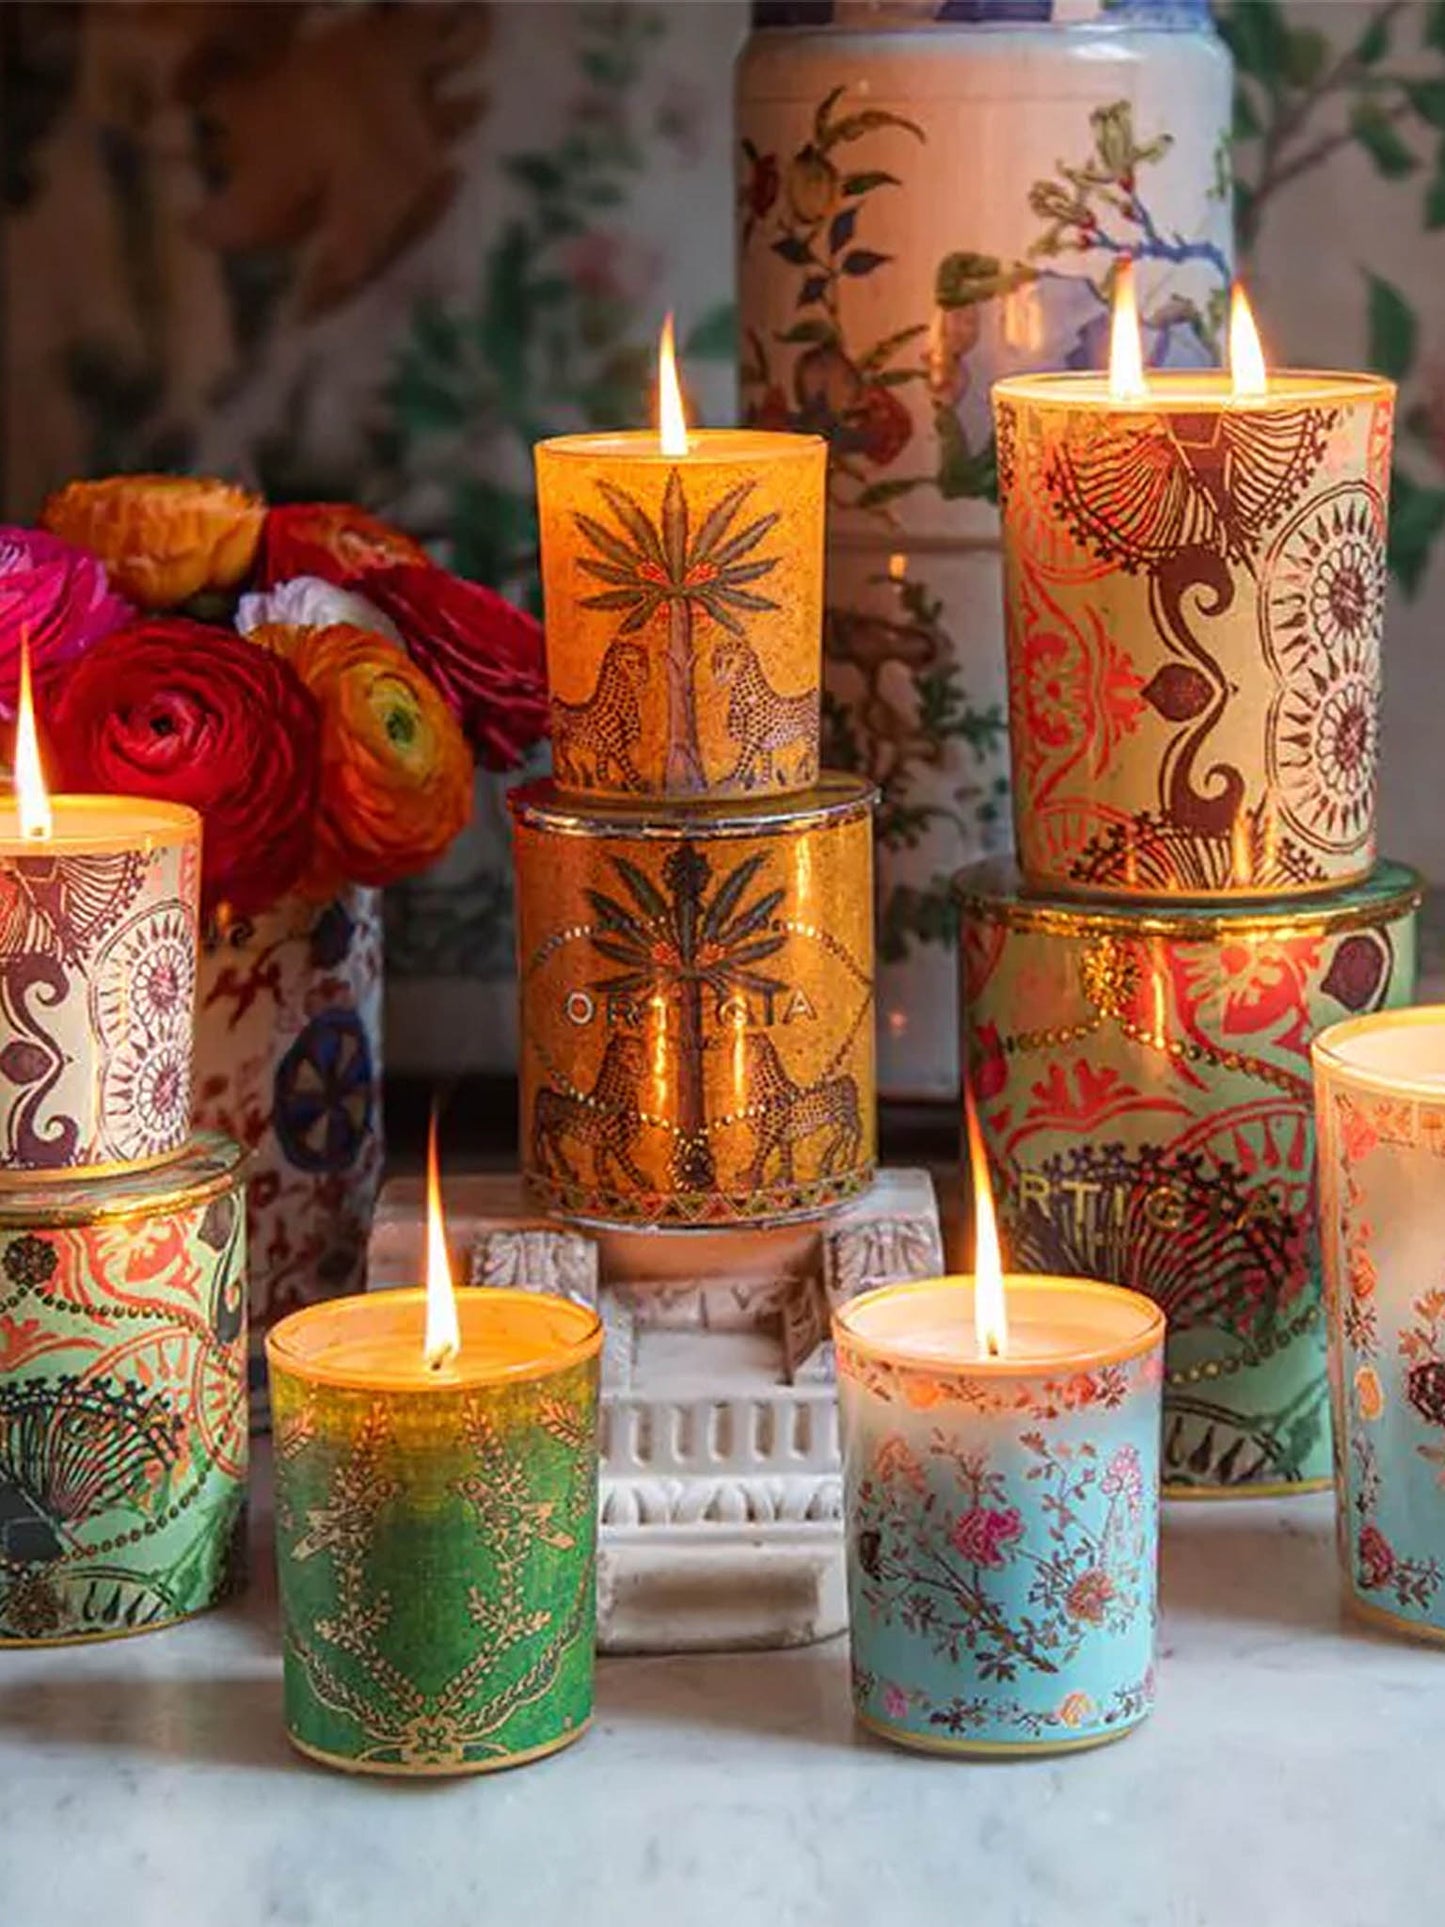 Collection of Ortigia Decorated Candles lit and piles up with their packaging canisters and some flowers